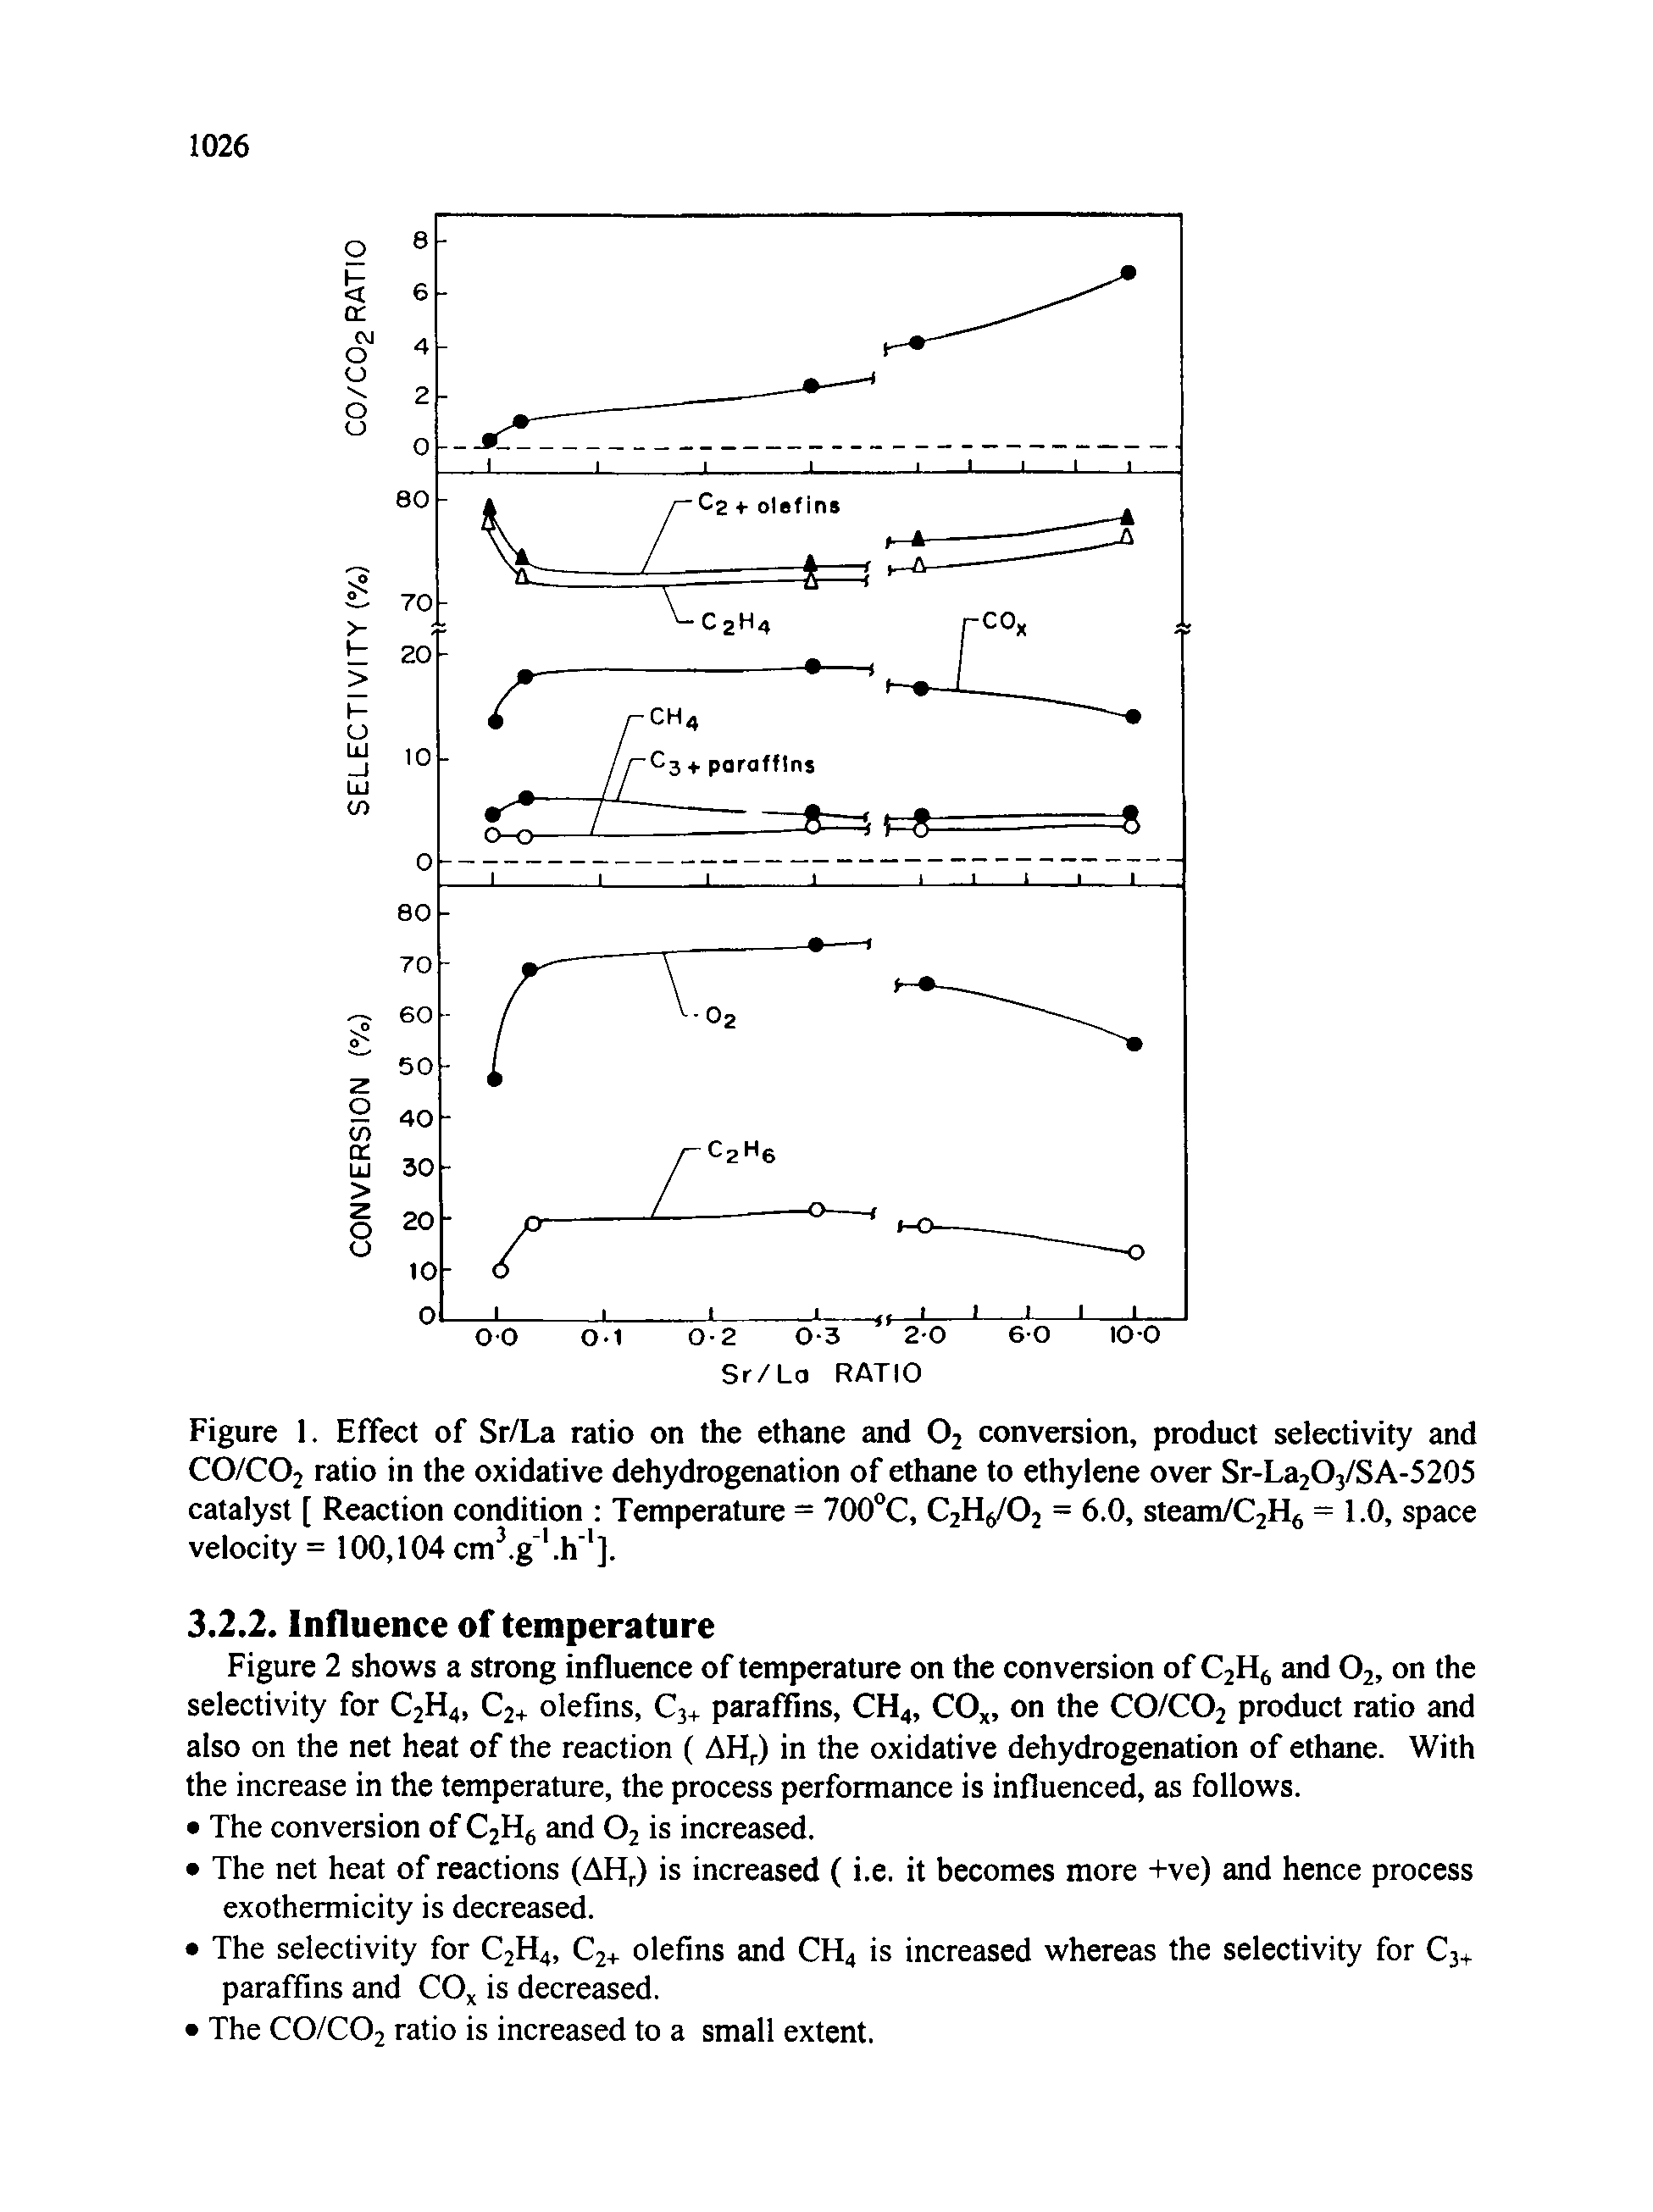 Figure 1. Effect of Sr/La ratio on the ethane and O2 conversion, product selectivity and CO/CO2 ratio in the oxidative dehydrogenation of ethane to ethylene over Sr-La2O3/SA-5205 catalyst [ Reaction condition Temperature = 700°C, C2H5/O2 = 6.0, steam/C2H6 = 1.0, space velocity = 100,104 cm. g. h ].